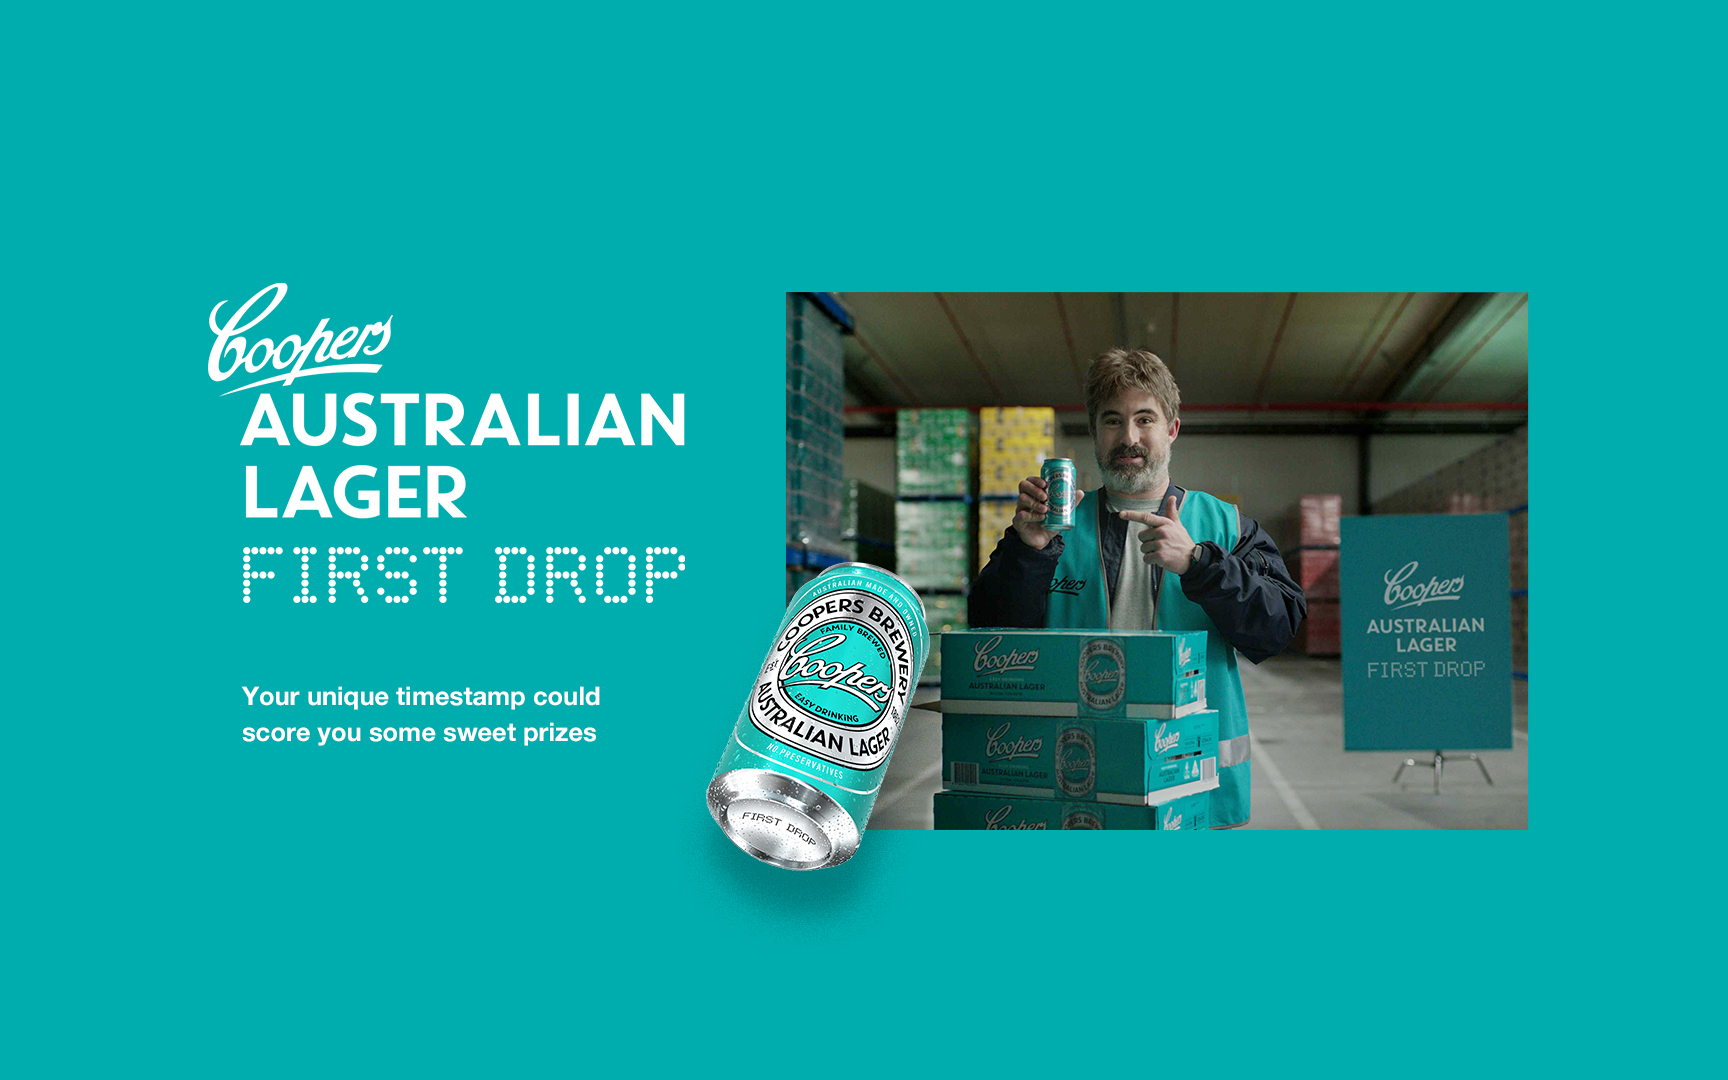 Coopers Australian Lager First Drop Promotion